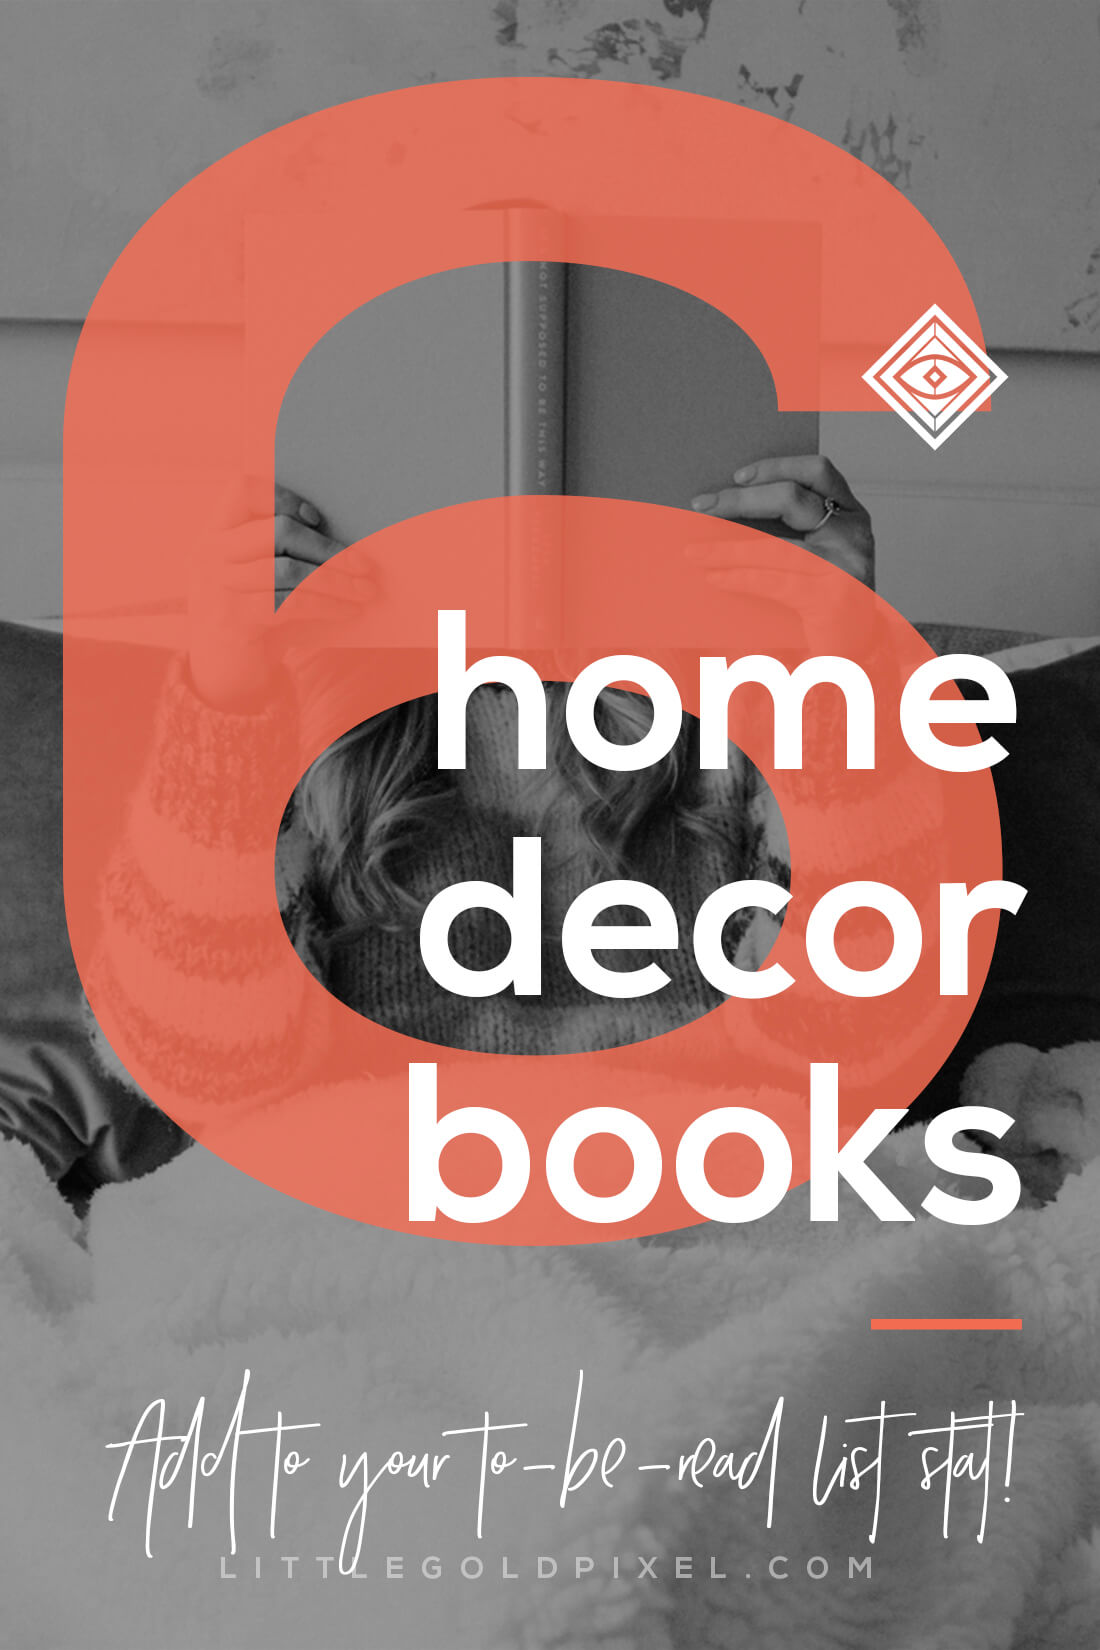 6 Home Decor Books to Add to Your To-Be-Read Wish List • Little Gold Pixel • Here are 6 home decor books to add to your to-be-read wish list. These books will inspire you to hone your decor style AND look good on your coffee table. #homedecor #decorbooks #decorblog #tbrlist #tbr #littlegoldpixel